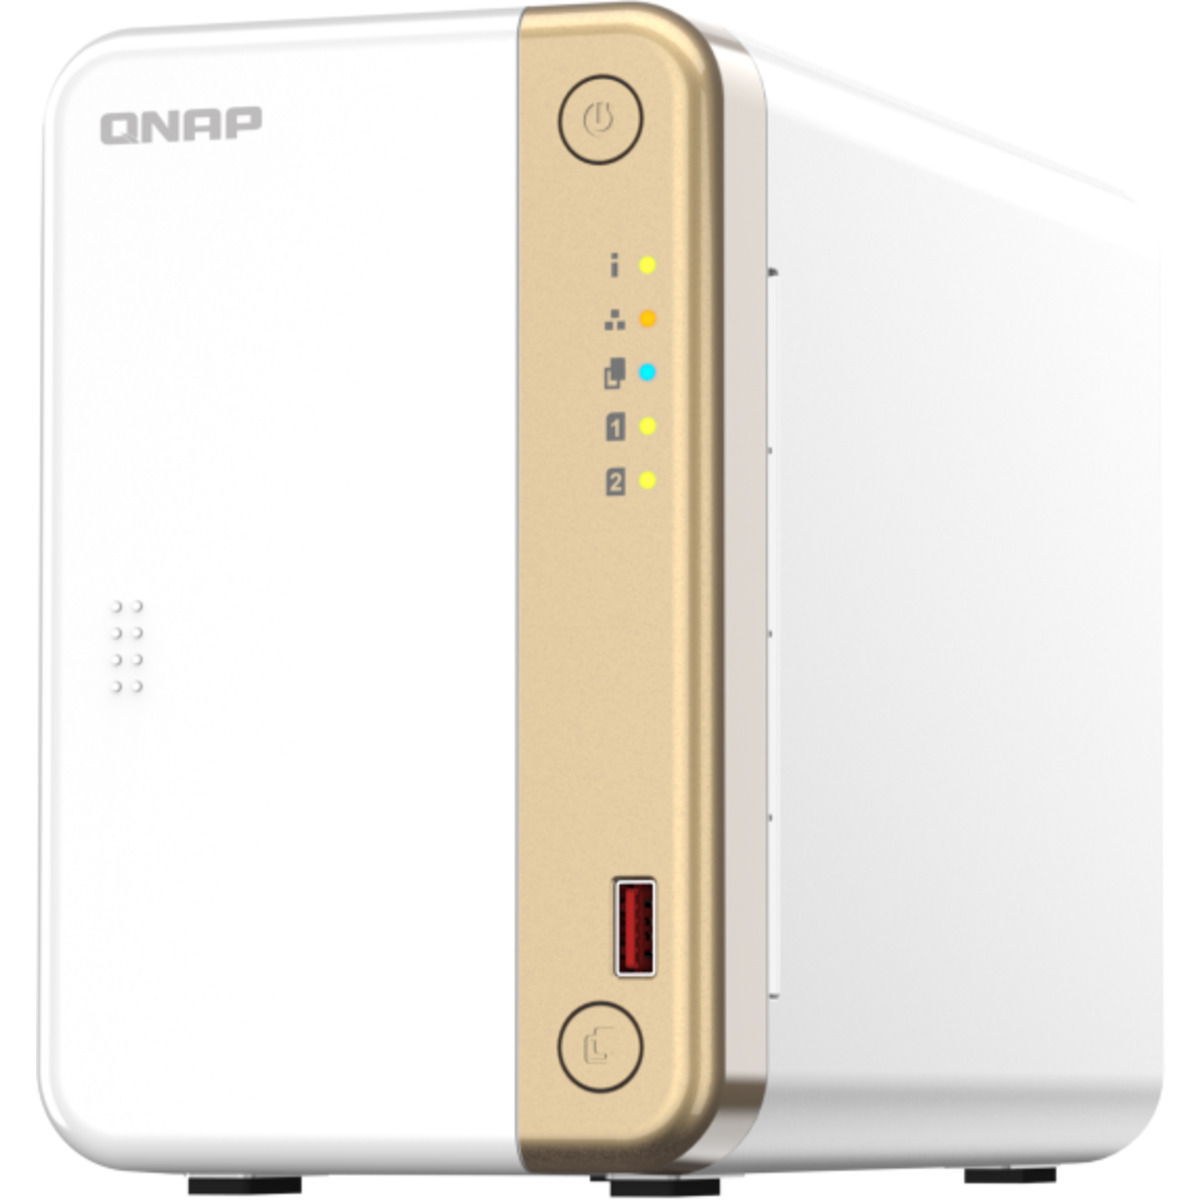 buy QNAP TS-262 16tb Desktop NAS - Network Attached Storage Device 2x8000gb Seagate IronWolf Pro ST8000NT001 3.5 7200rpm SATA 6Gb/s HDD NAS Class Drives Installed - Burn-In Tested - ON SALE - nas headquarters buy network attached storage server device das new raid-5 free shipping usa spring sale TS-262